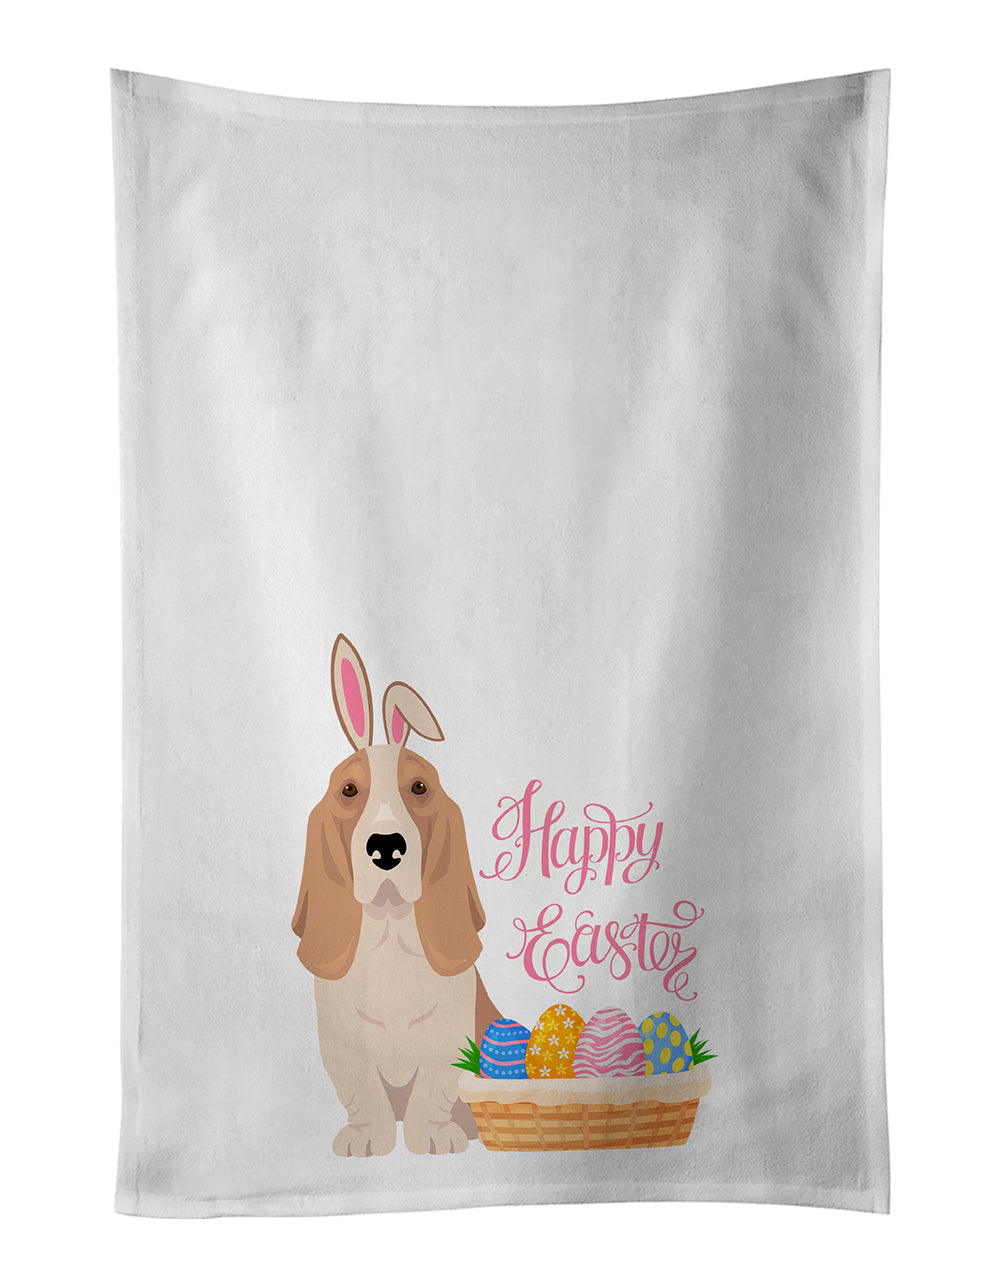 Buy this Lemon and White Tricolor Basset Hound Easter White Kitchen Towel Set of 2 Dish Towels